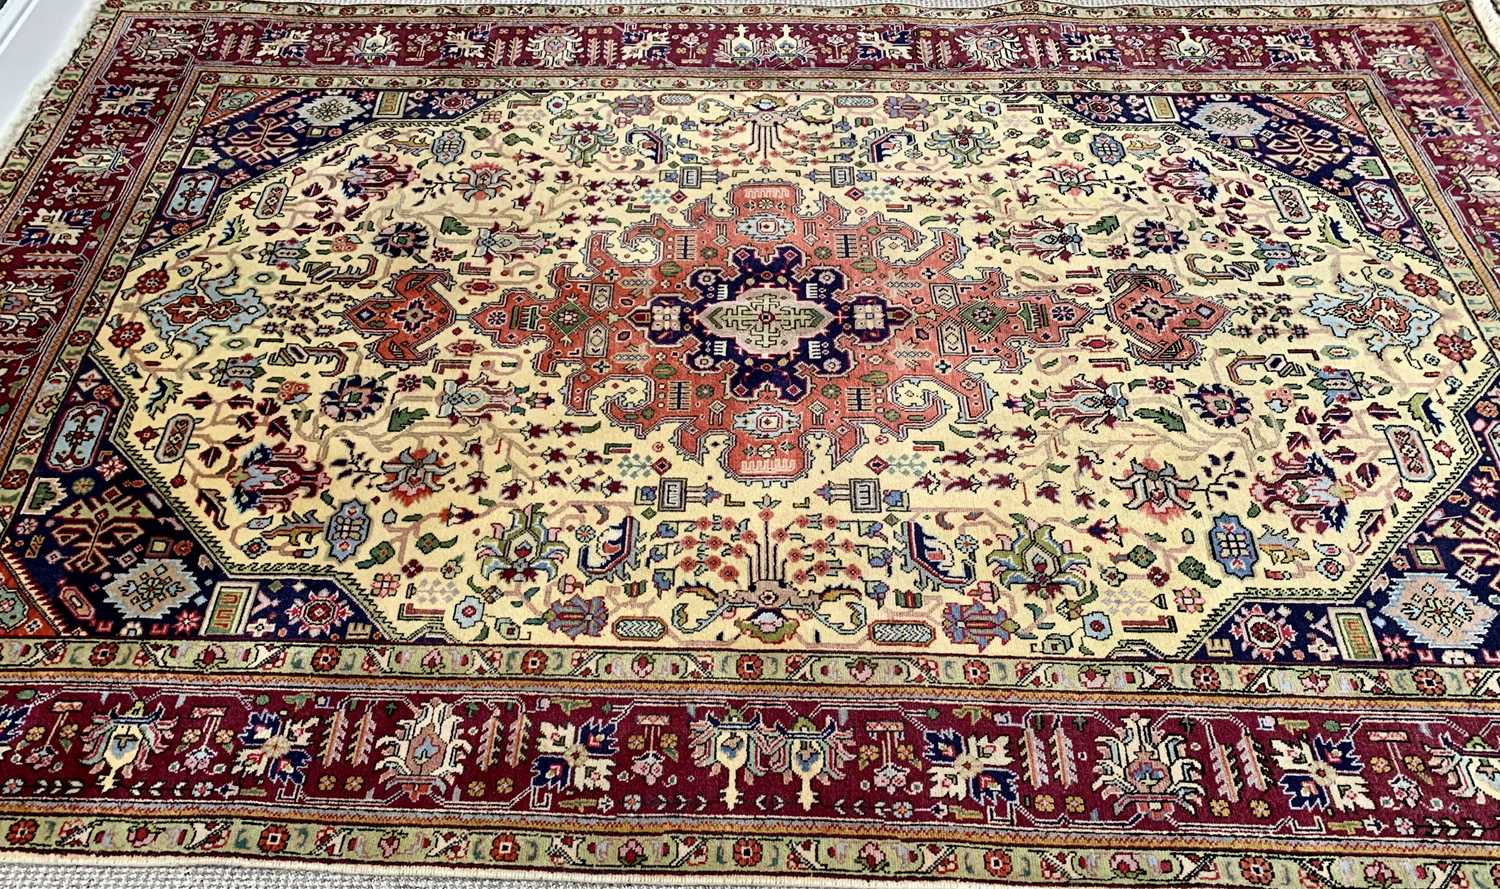 LARGE EASTERN STYLE RUG - multiple bordered with tasselled ends, traditional central motif and - Image 2 of 3